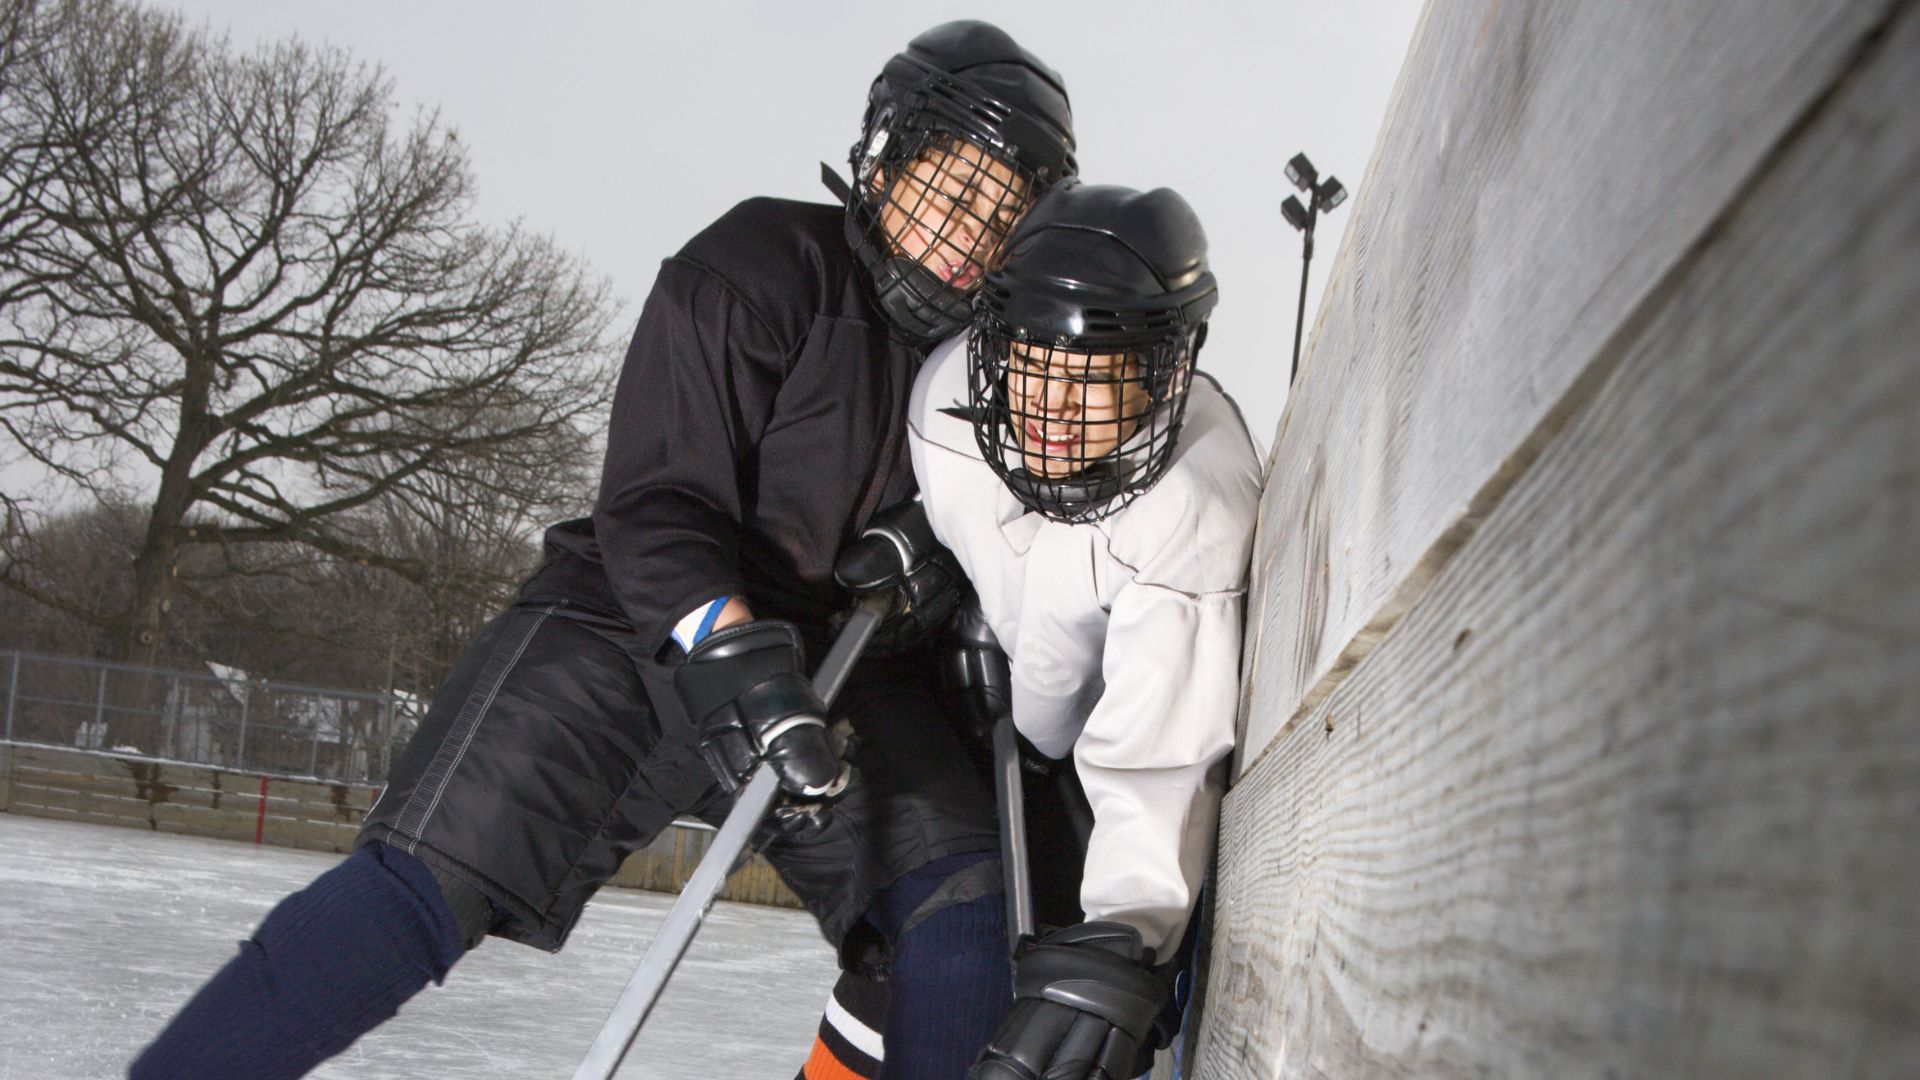 Youth hockey player bodychecking opponent into boards. Chronic traumatic encephalopathy (CTE) risk. How to prevent concussion in youth hockey. Concussion management Propel Physiotherapy.